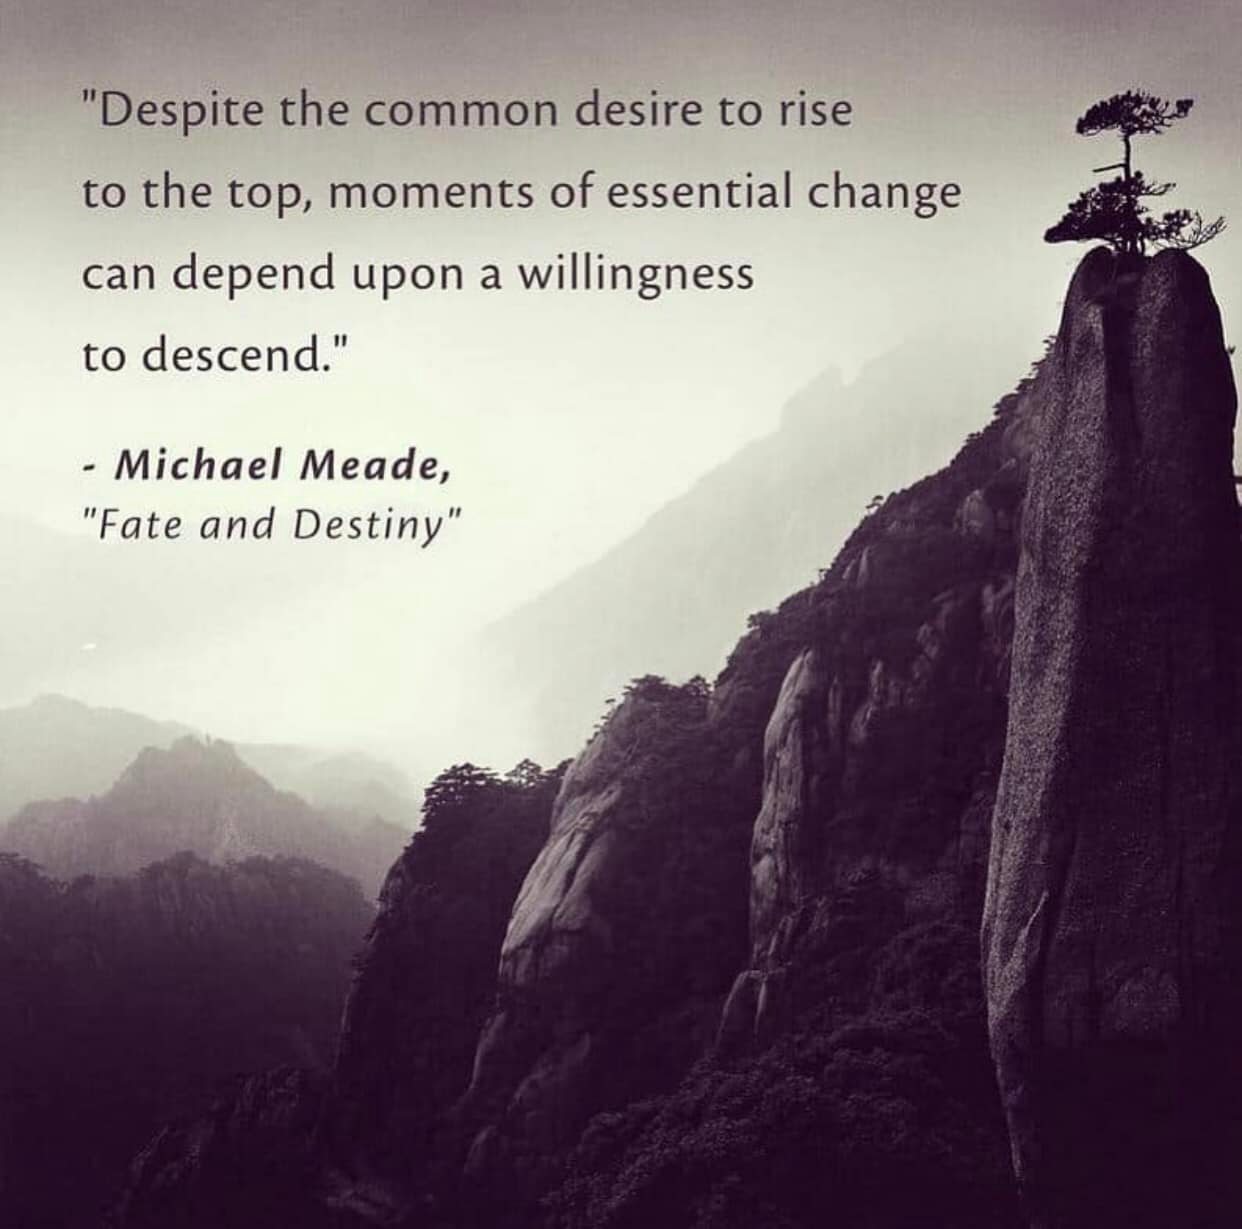 Despite the common desire to rise to the top, moments of essential change can depend upon a willingness to descend.